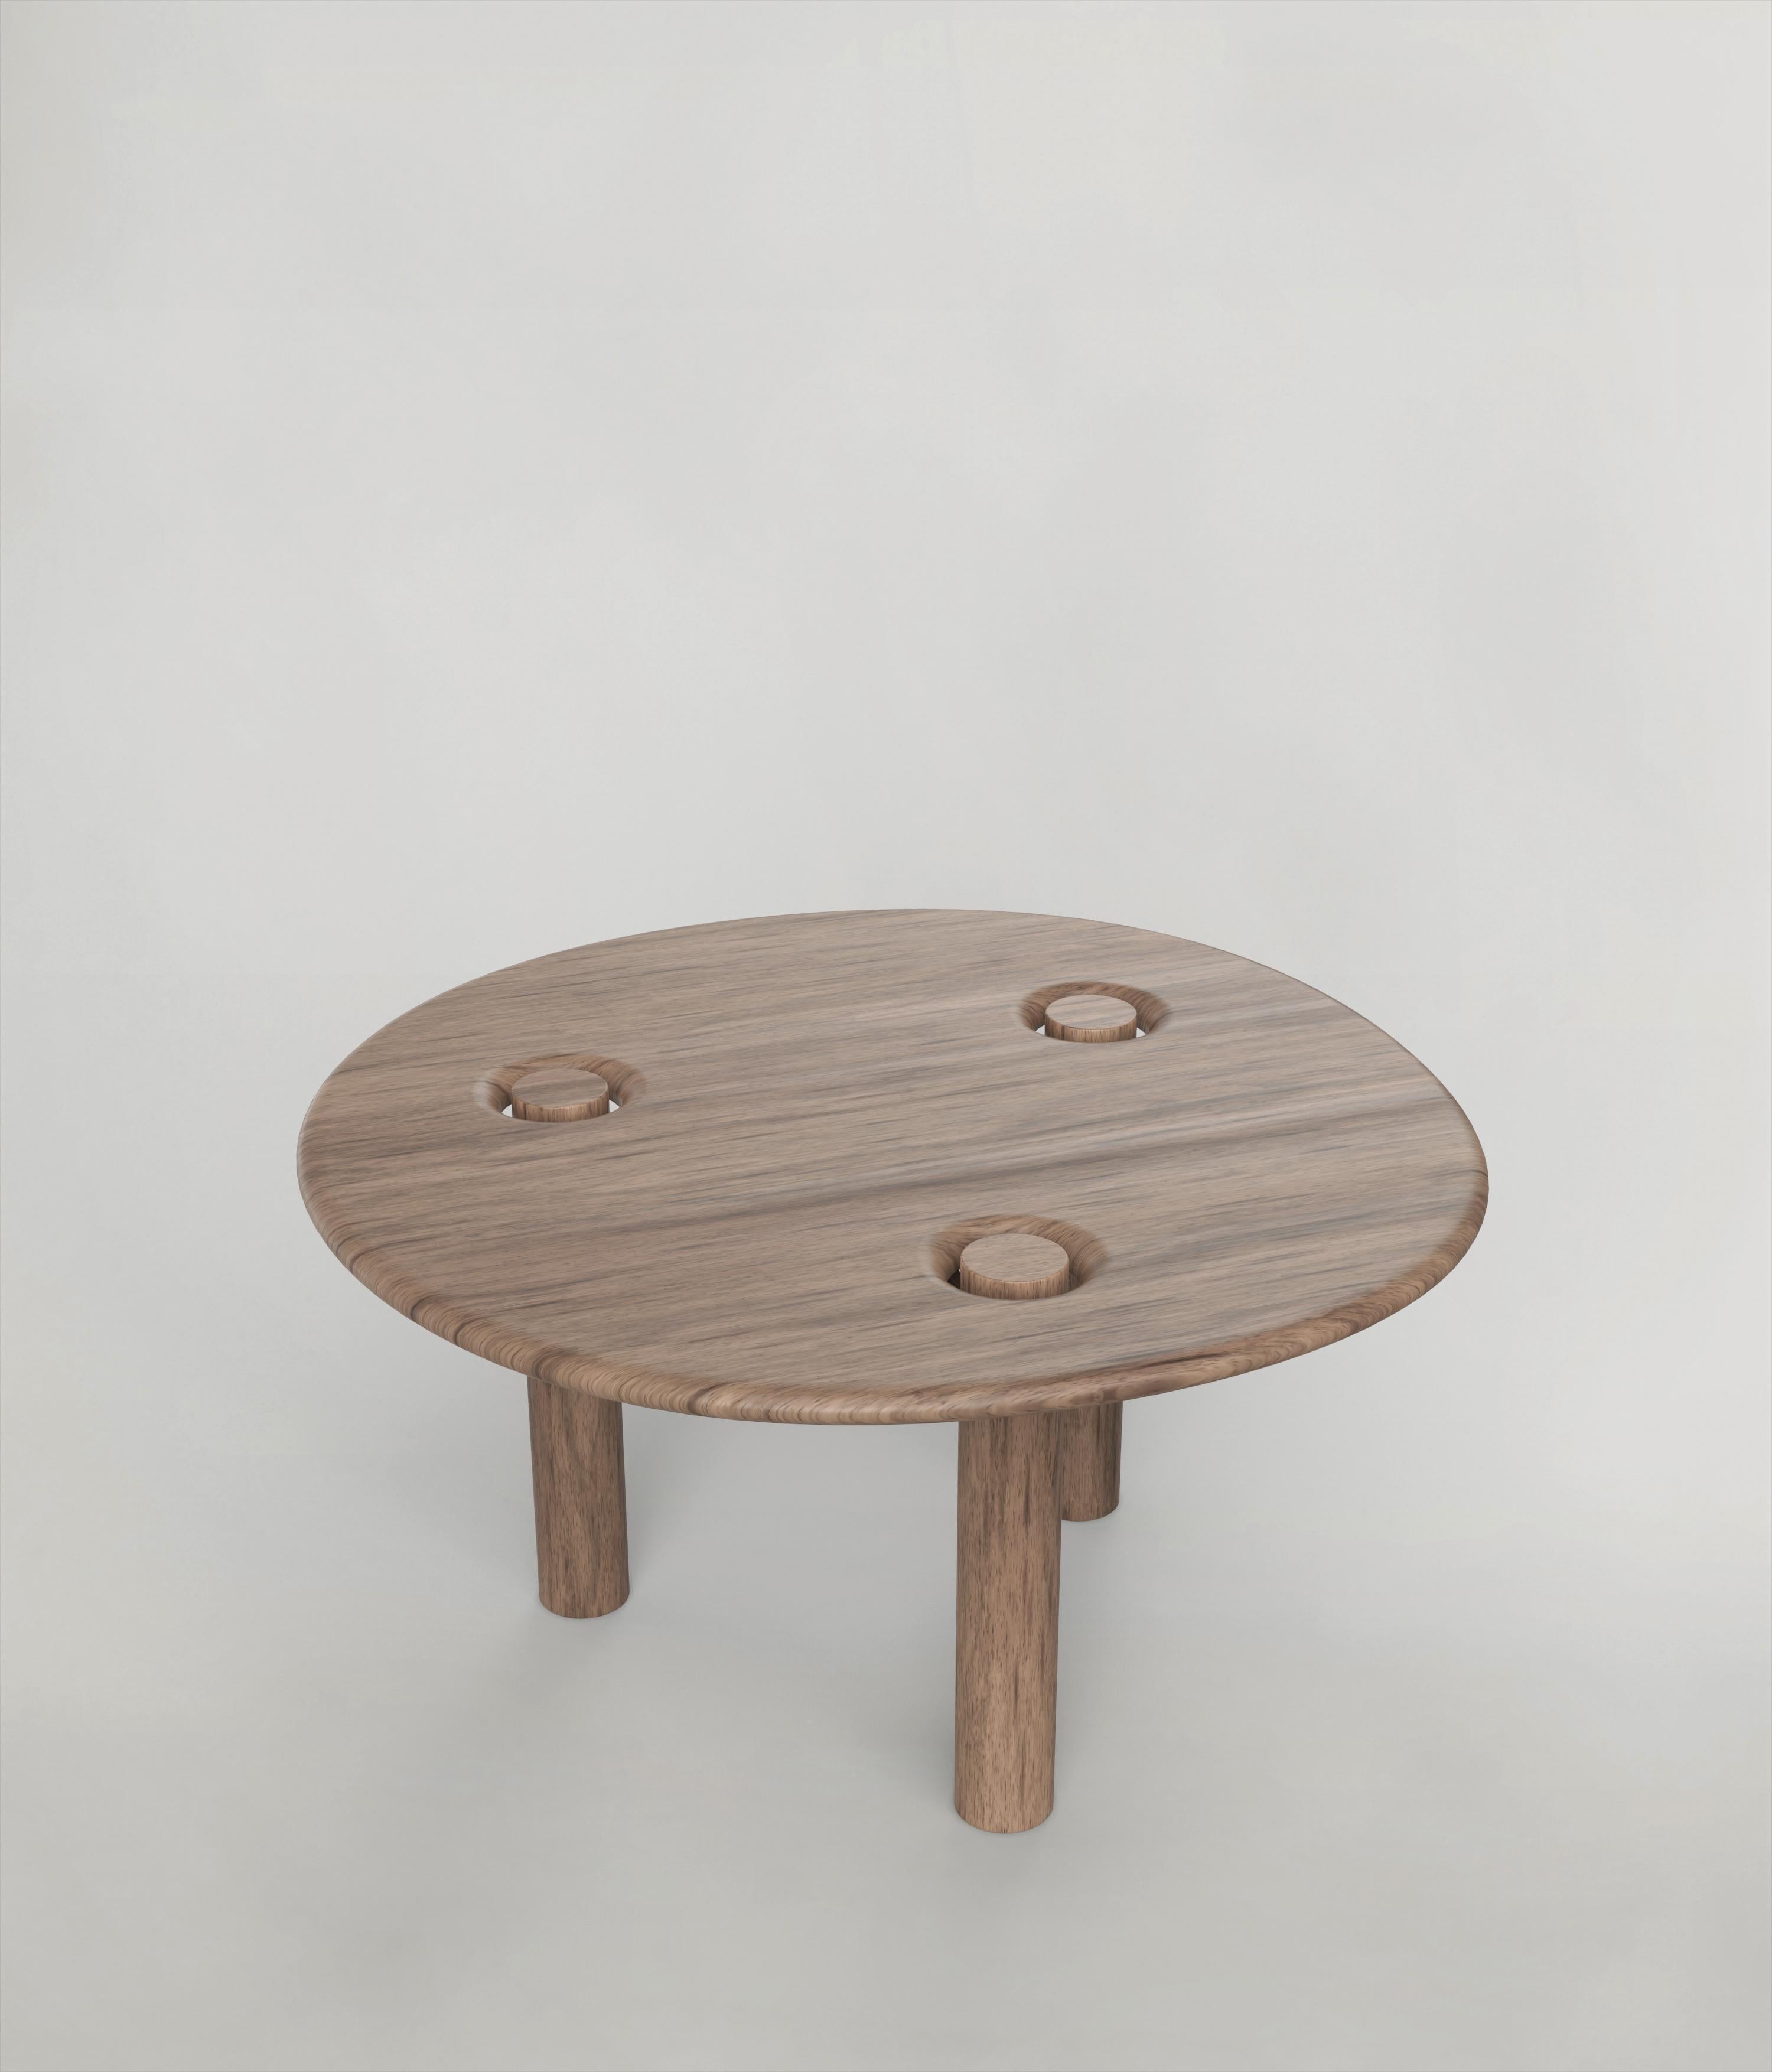 Asido V3 represents the elegance of Italian 21st Century manufacturing, the experience and savoir faire of our woodworkers. The round table is manufactured in a limited edition of 150 signed and progressively numbered examples. It is part of the